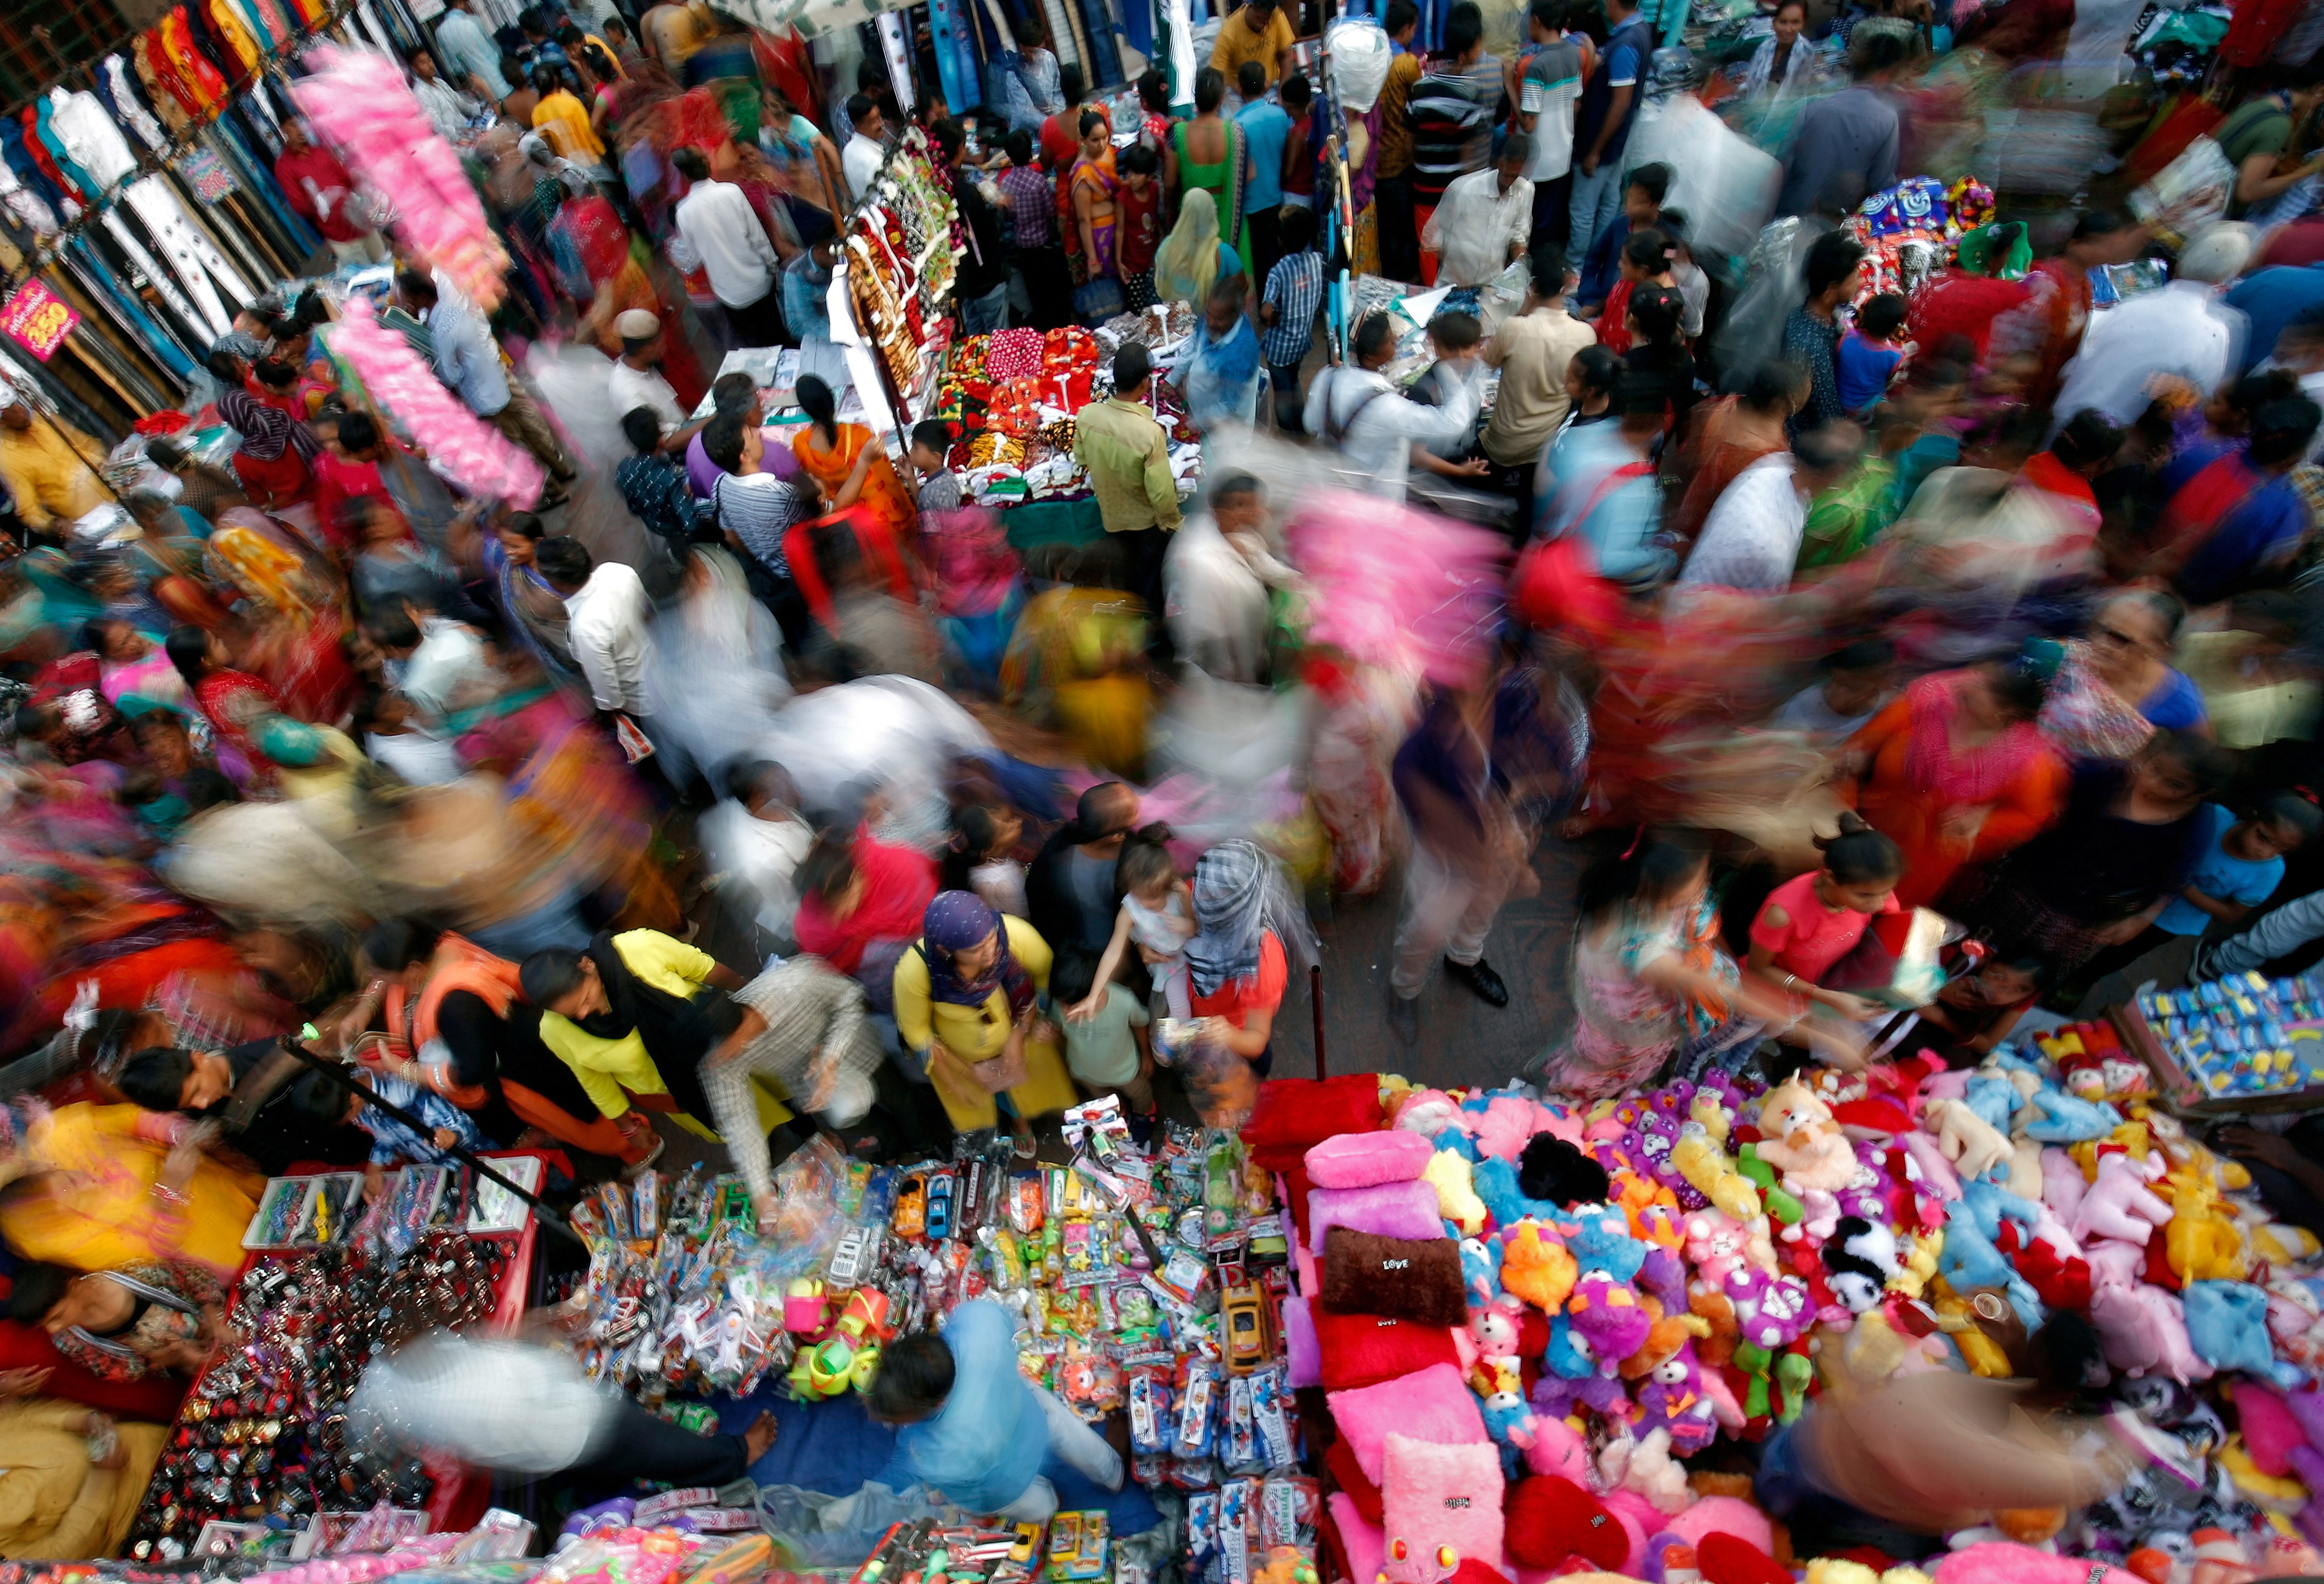 Shoppers crowd at a market place ahead of Diwali, the Hindu festival of lights, in Ahmedabad, India, October 22, 2019. REUTERS/Amit Dave/File Photo